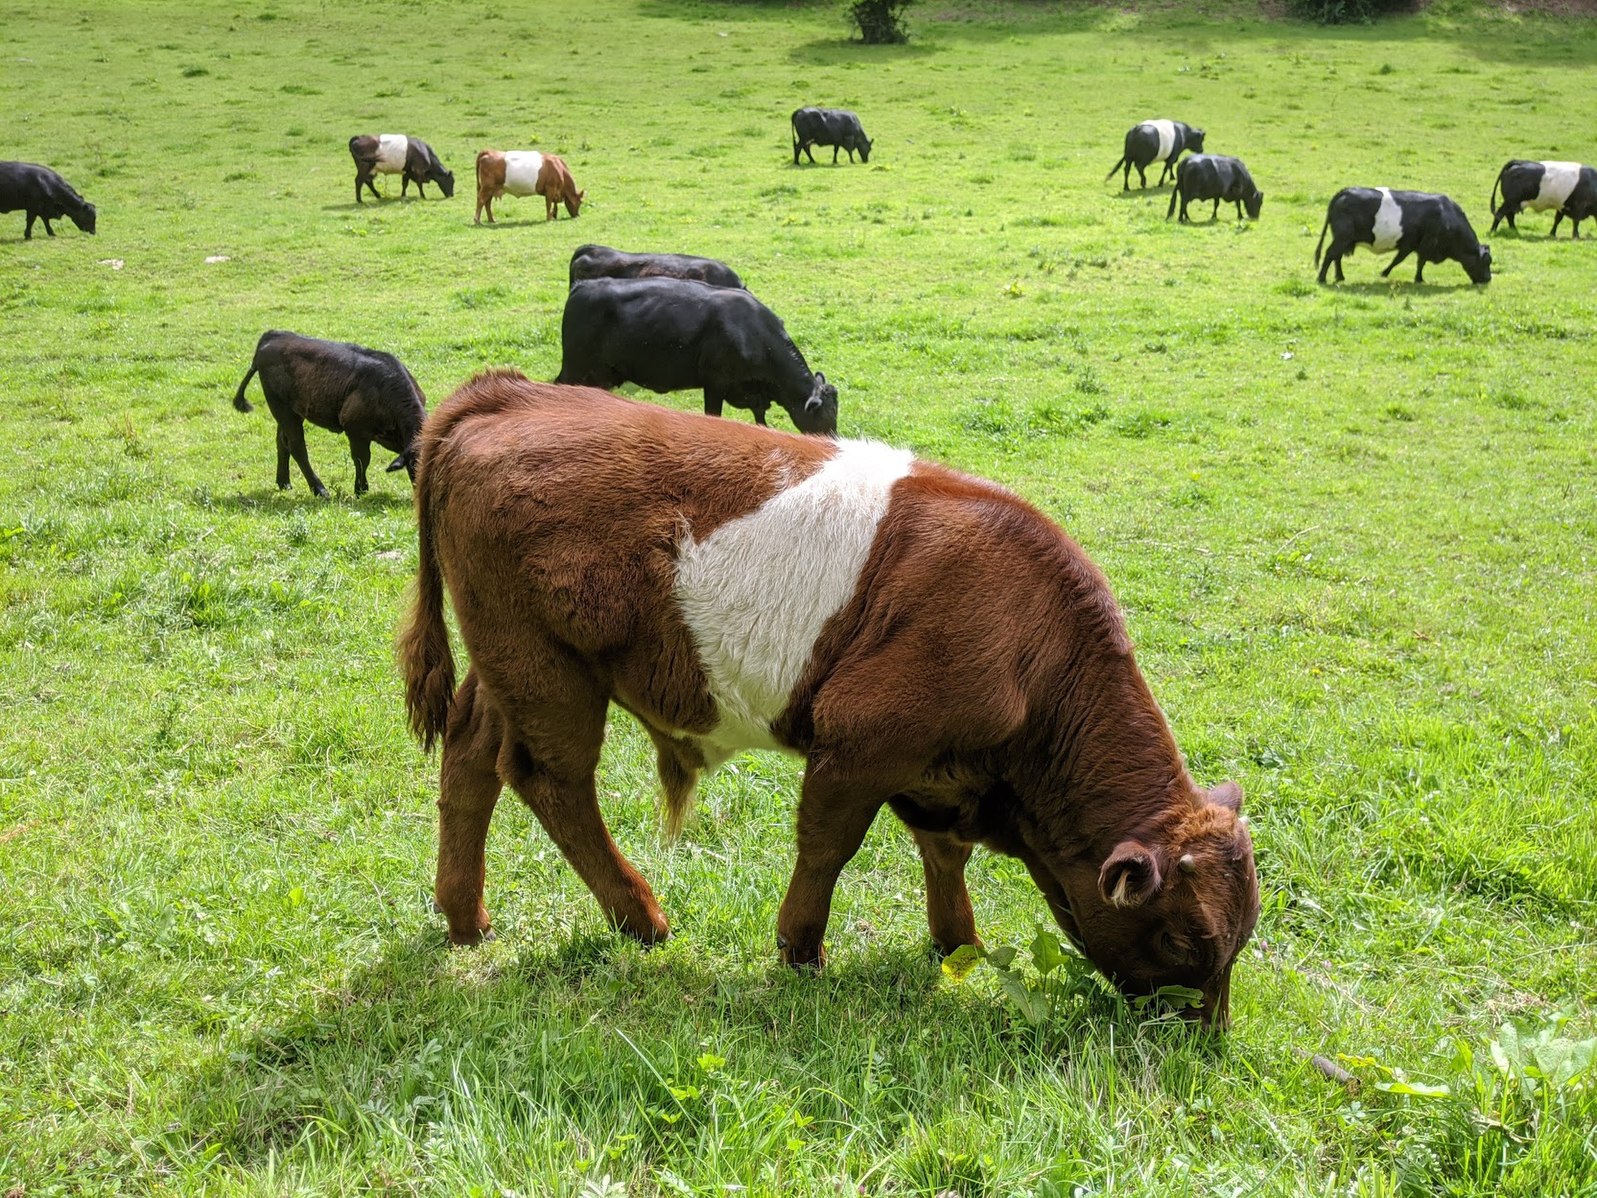 An image of a red belted galloway calf grazing in a green field in the U.K., with 11 other cows grazing in the background.